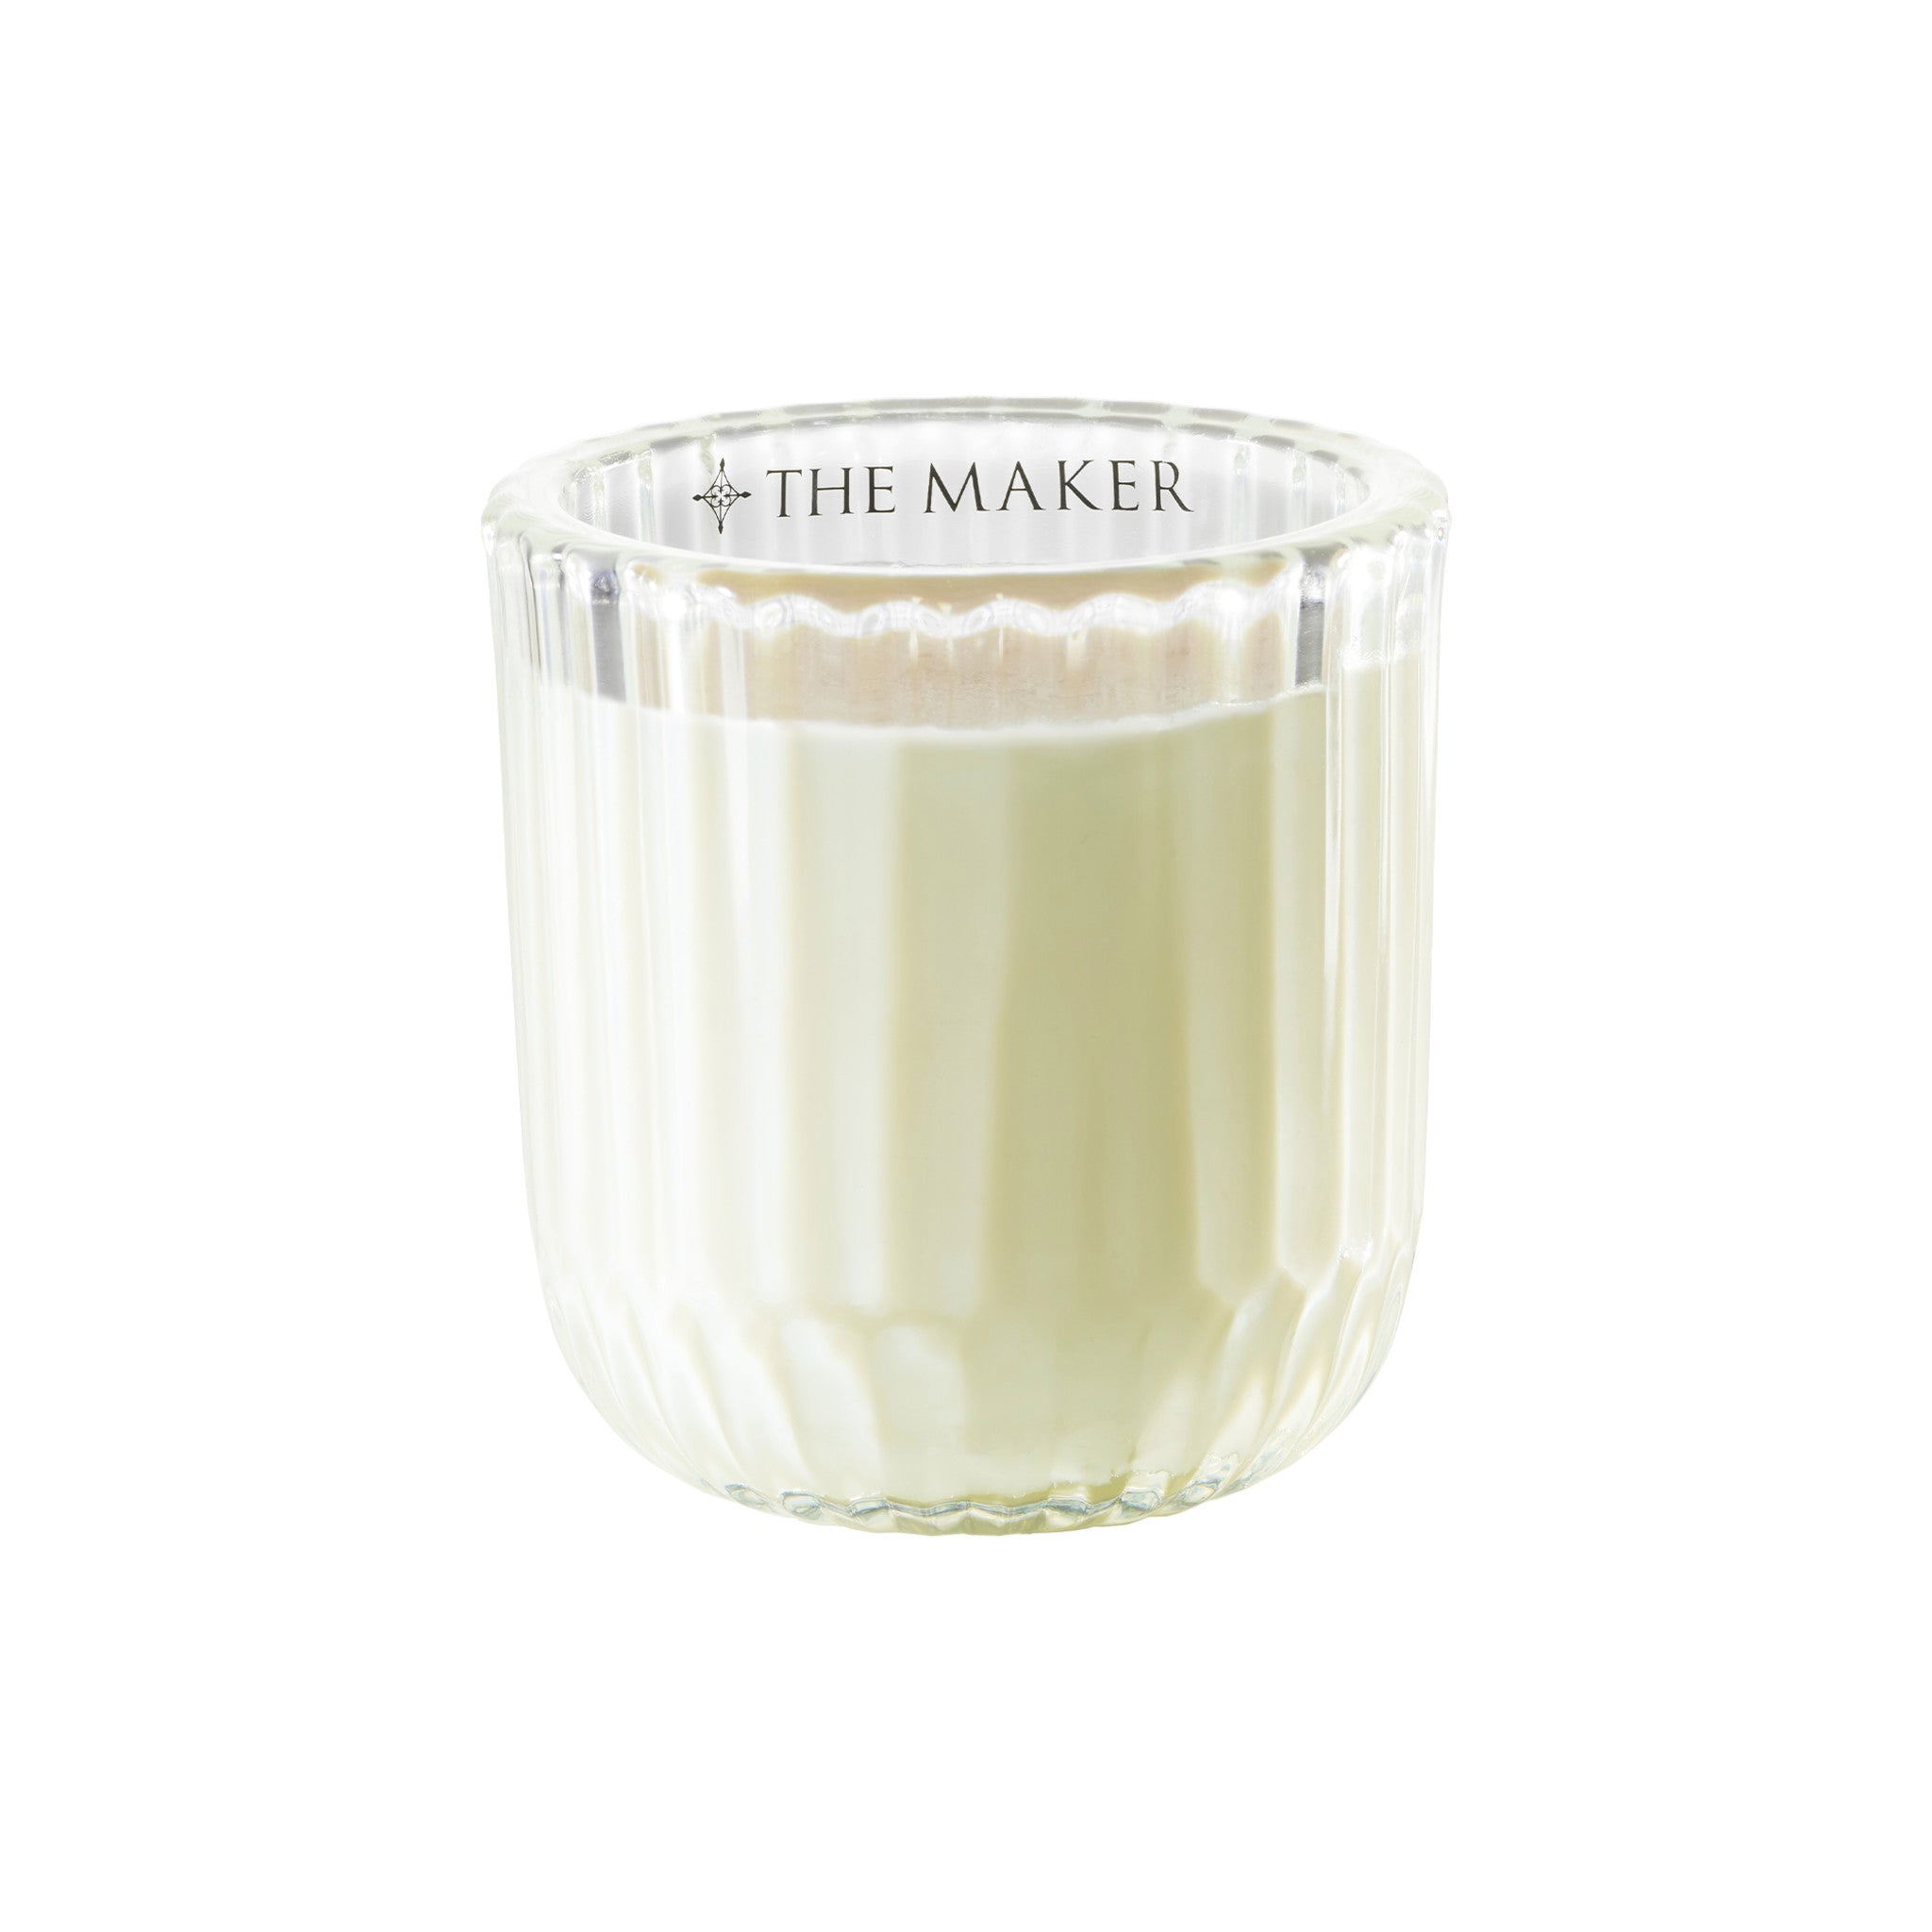 The Maker Architect Candle main image.